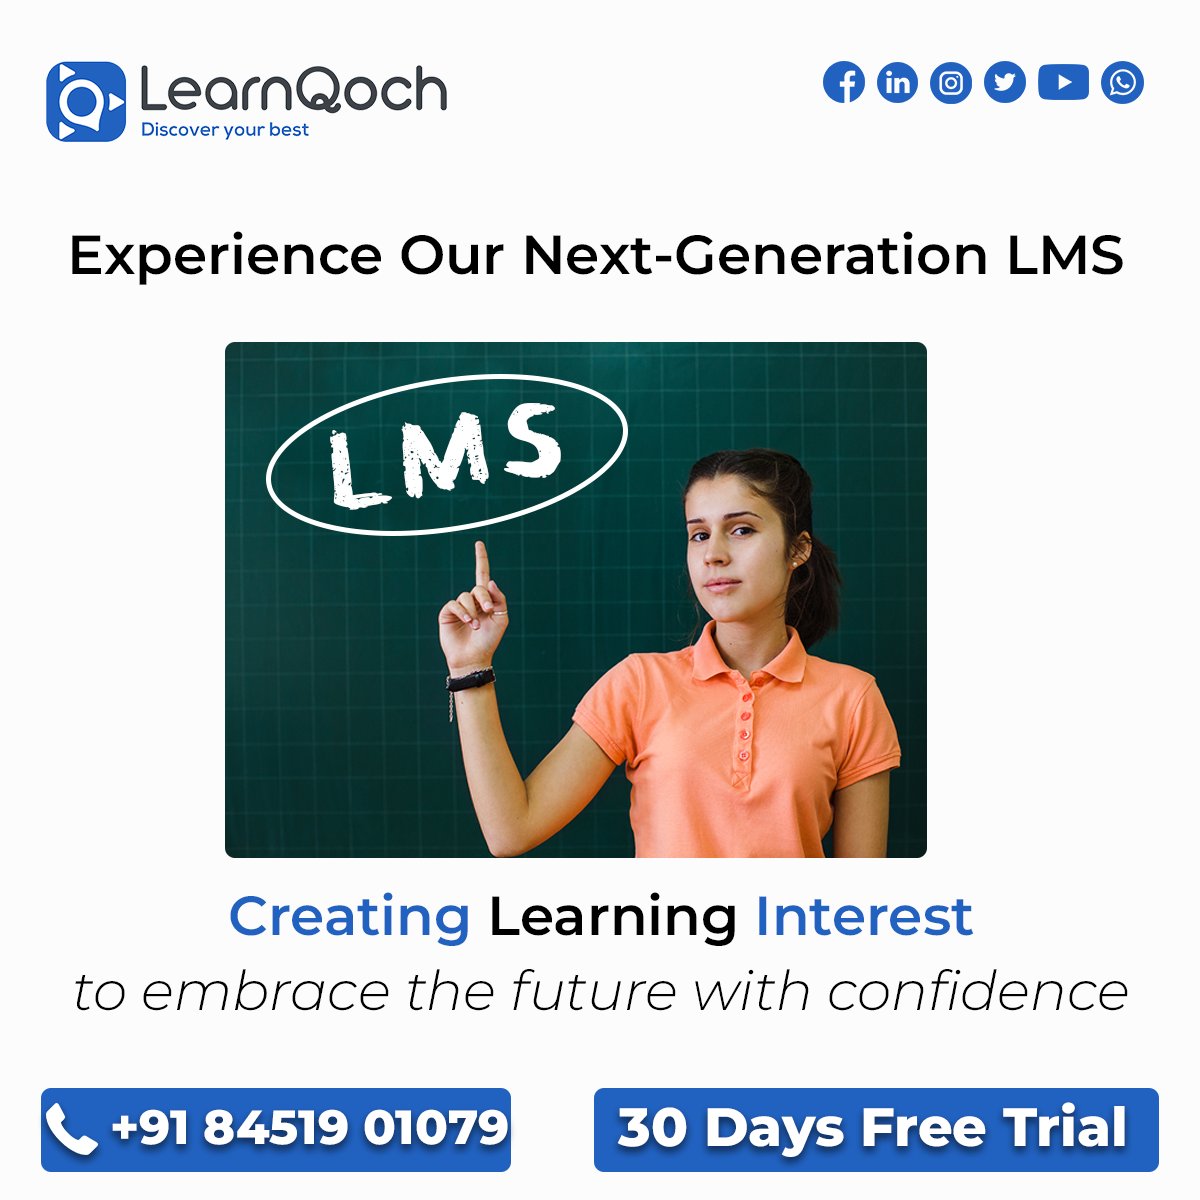 Experience Our LMS like no other, designed to create a genuine interest for learning. Let us ignite curiosity to embrace the future with unshakable confidence. Join us on this transformative journey today! 🌐📚 #EdTech #NextGenLMS #EmpowerEducation